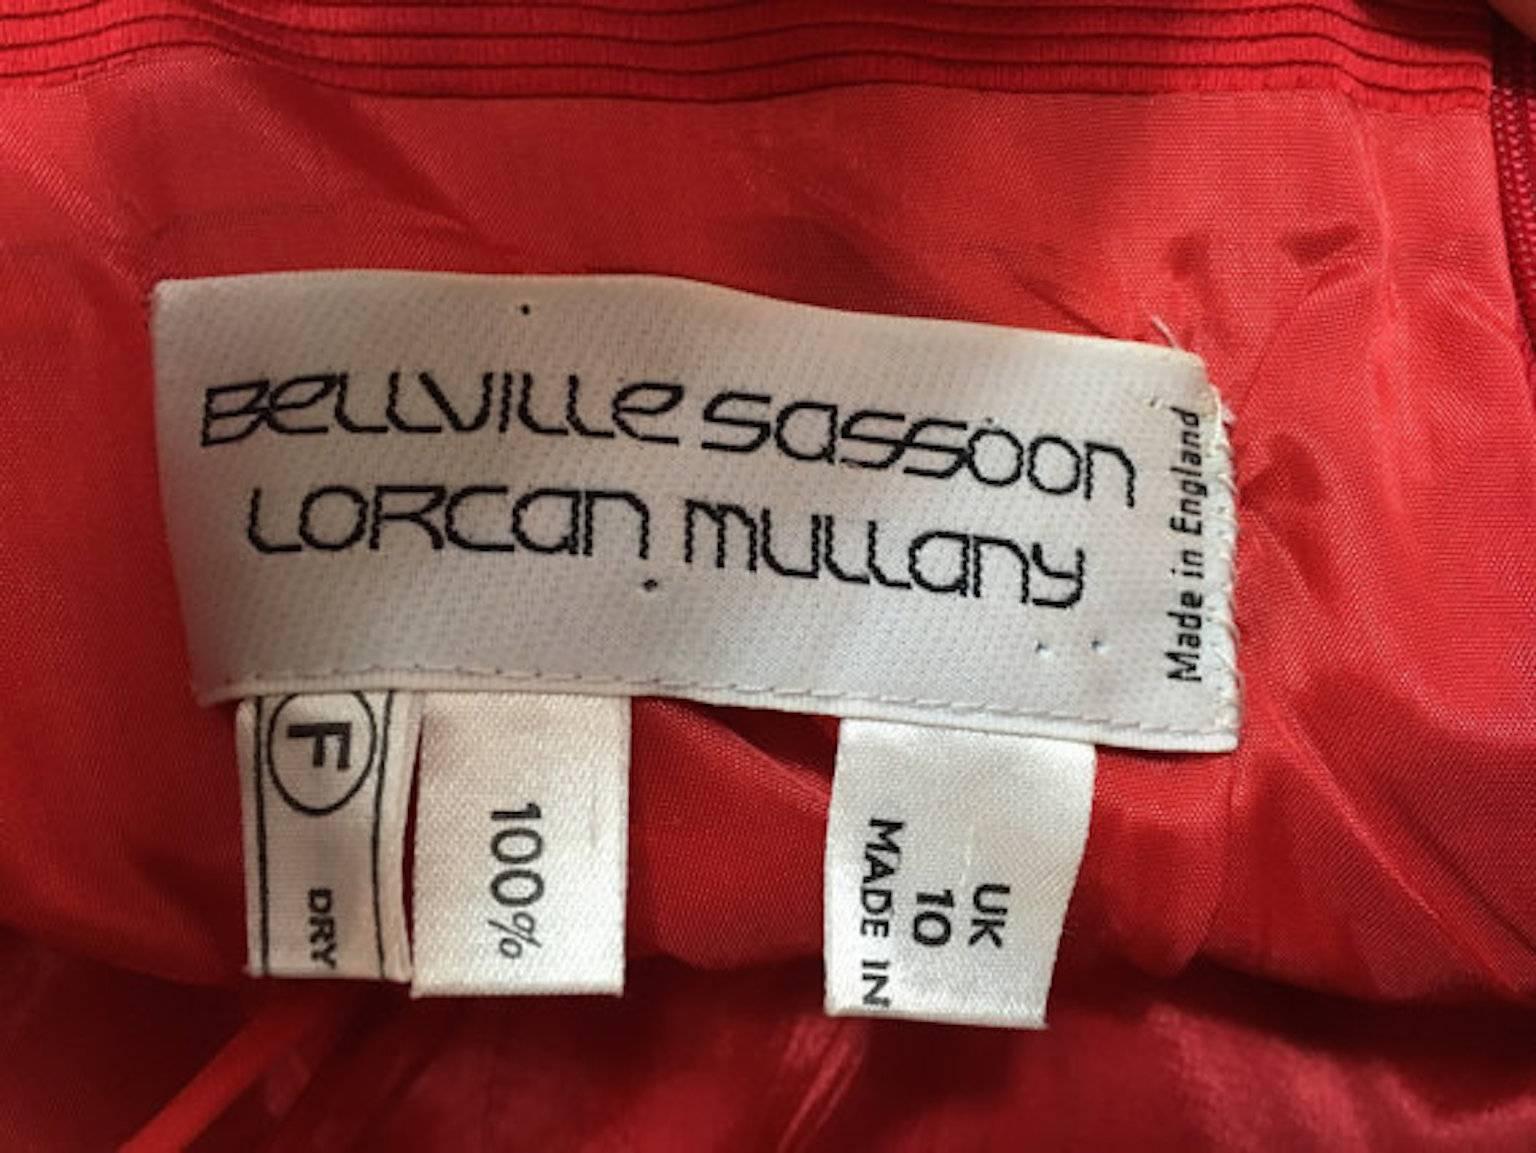 Bellville Sassoon Lorcan Mullany red vintage cocktail dress. Made from a finely corded acetate with scalloped layering and off shoulder finish. With back zip entry.

Size UK 8 Measuring 16.5 inches across bust and 34 inches length. 